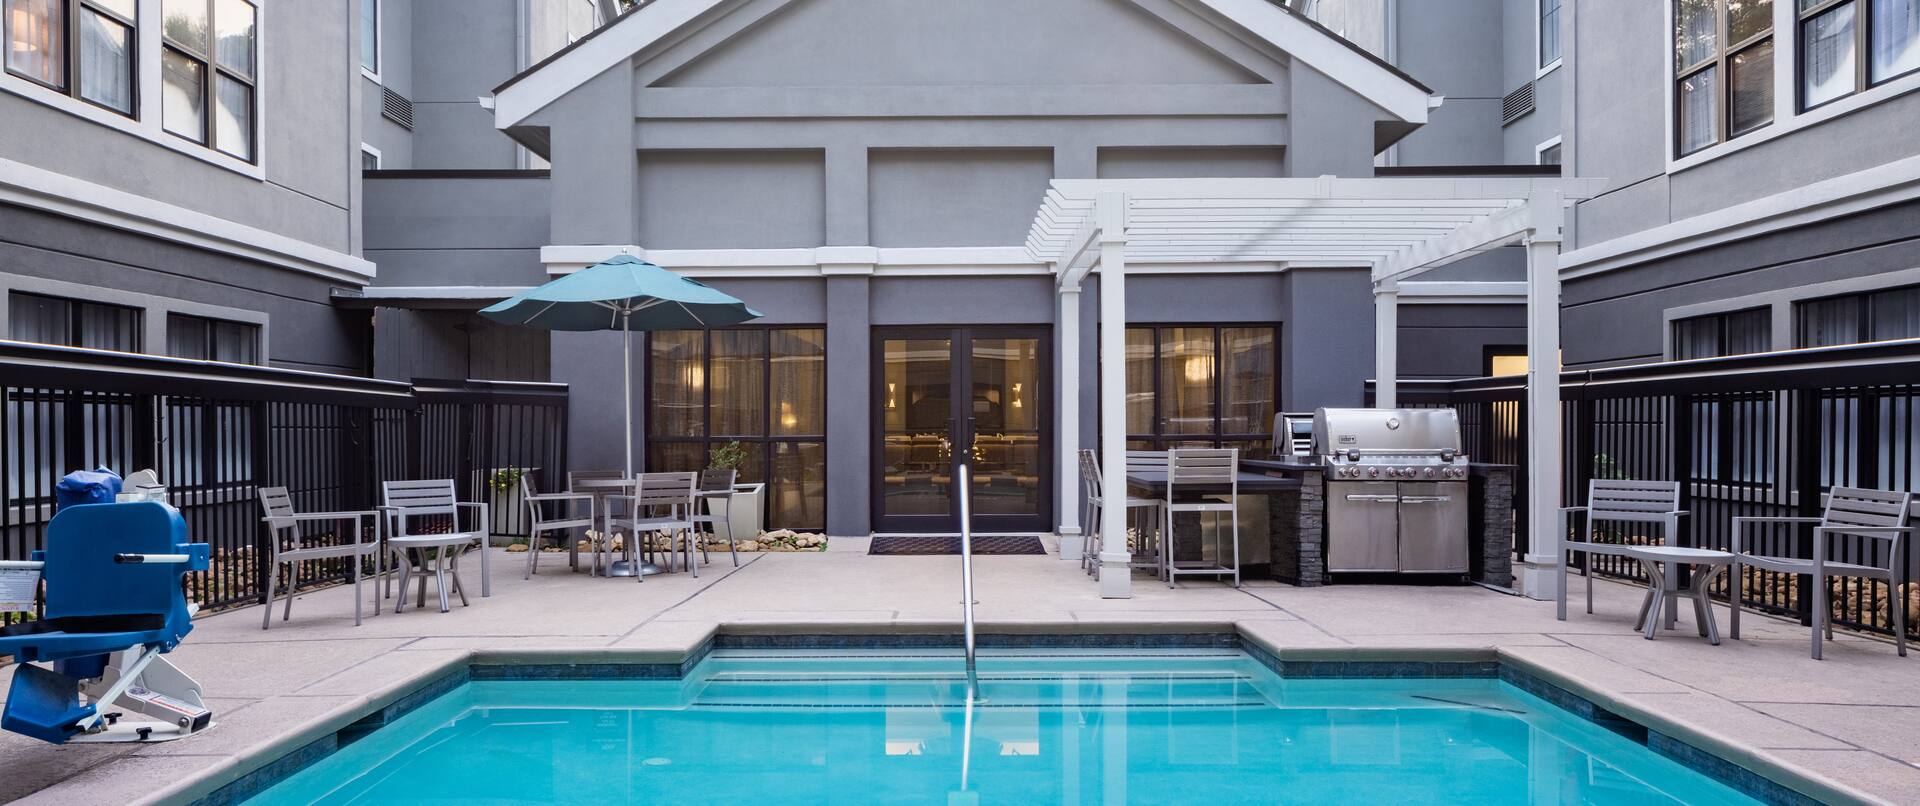 Outdoor Pool Area with Grills and Seating area